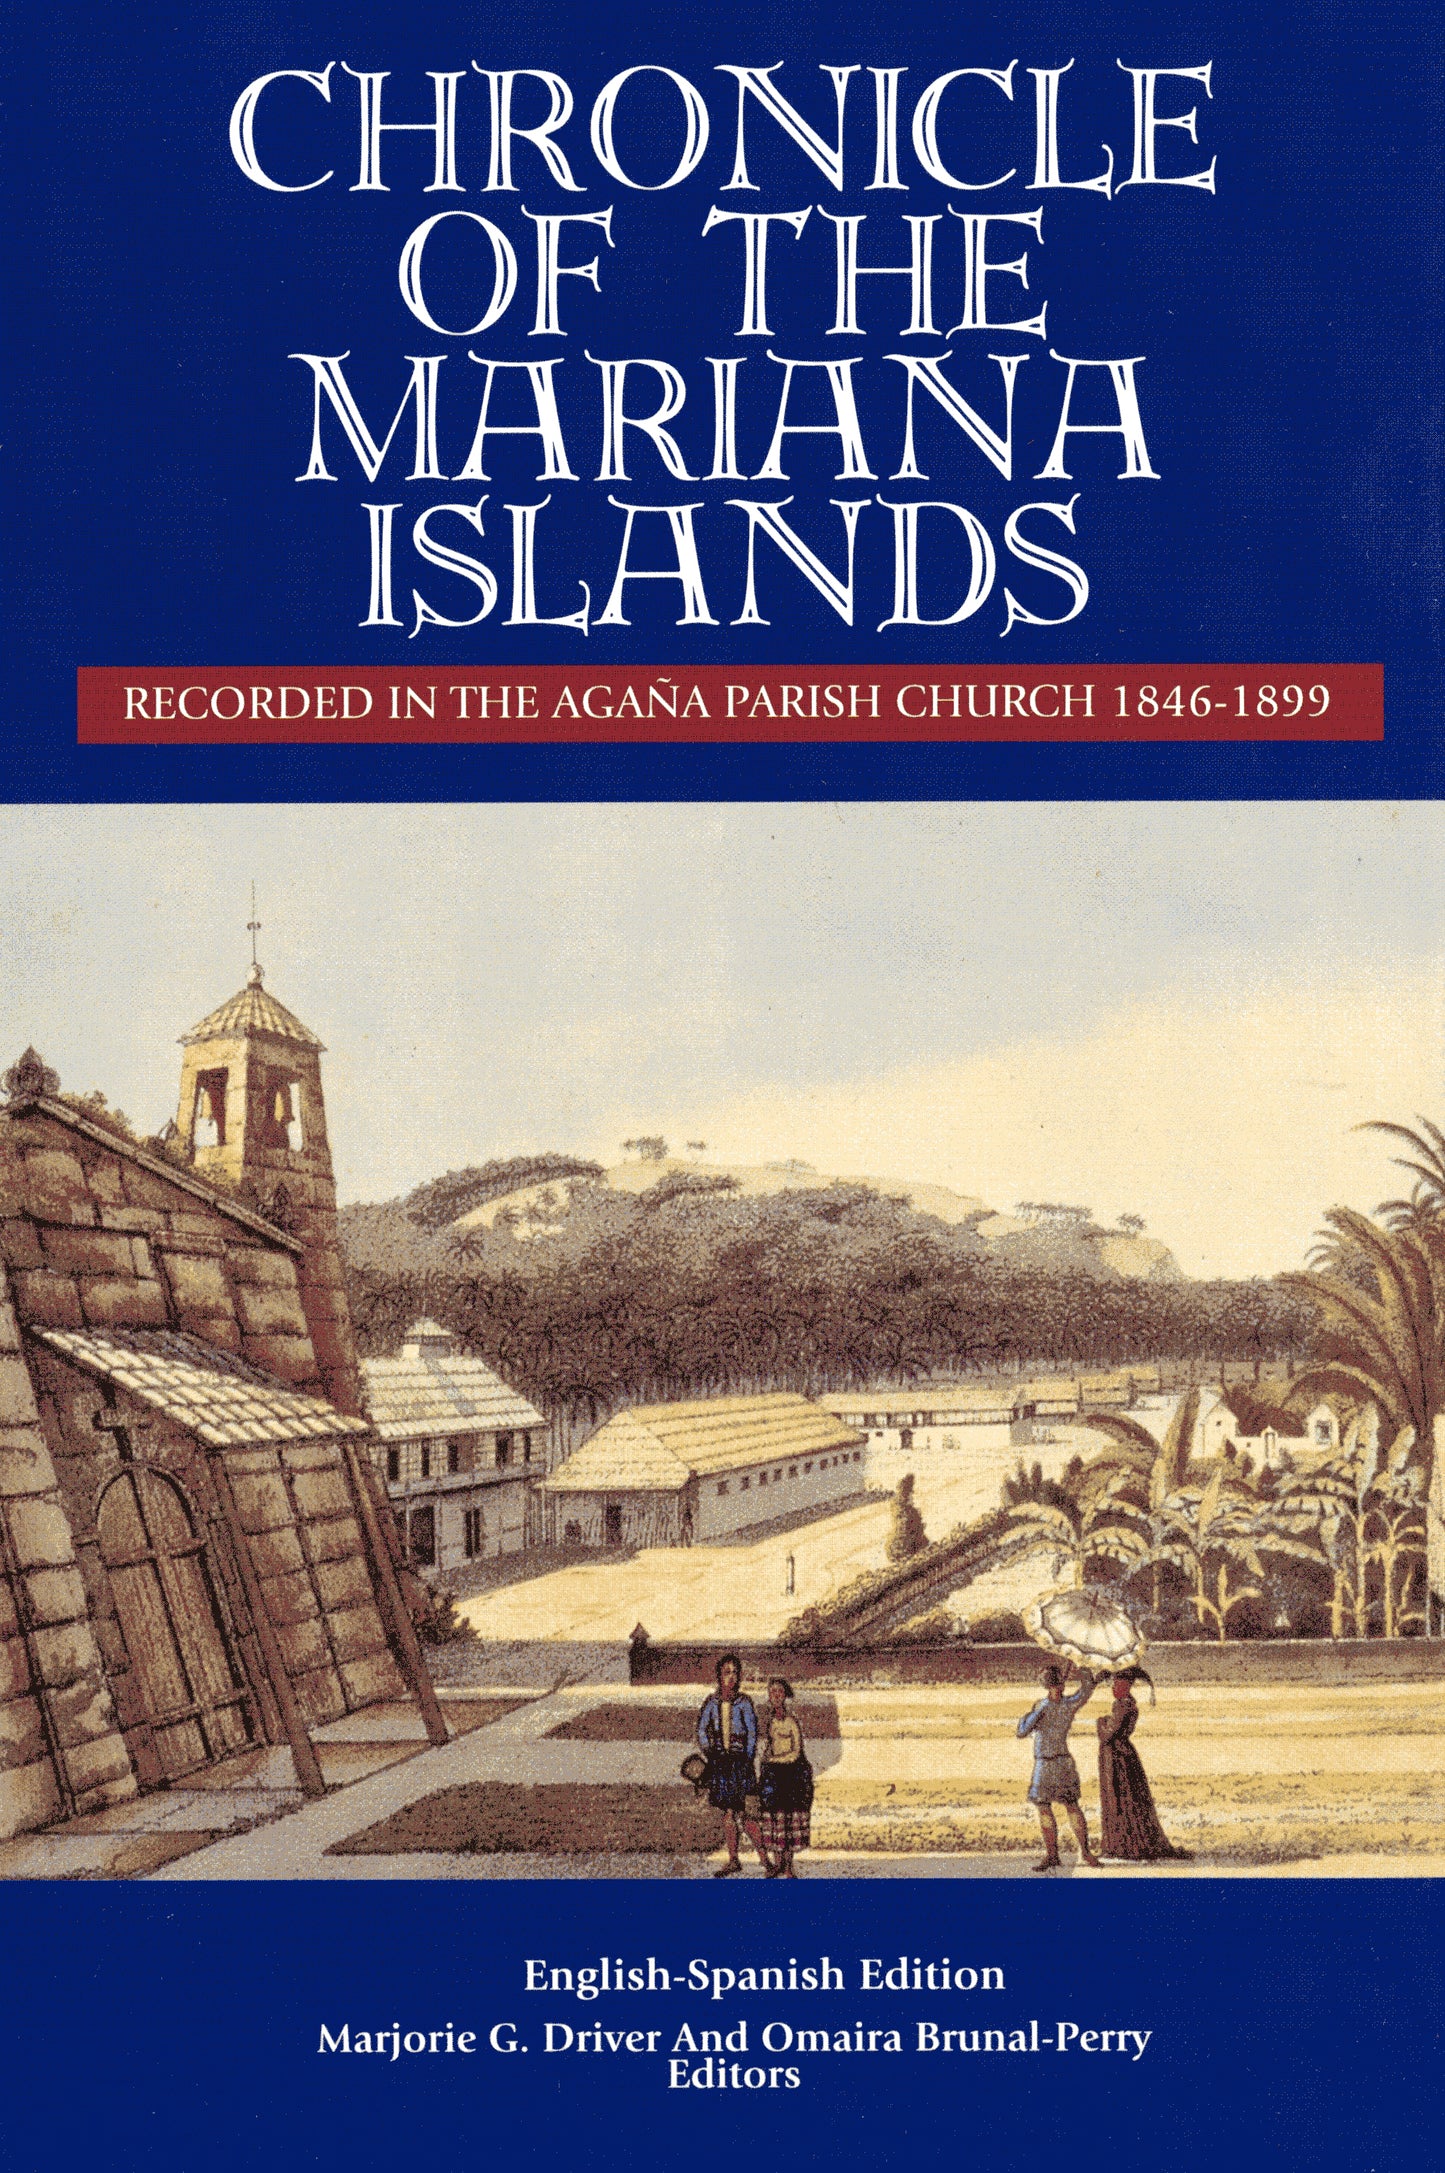 Chronicle of the Mariana Islands Recorded in the Agana Parish Church 1846-1899